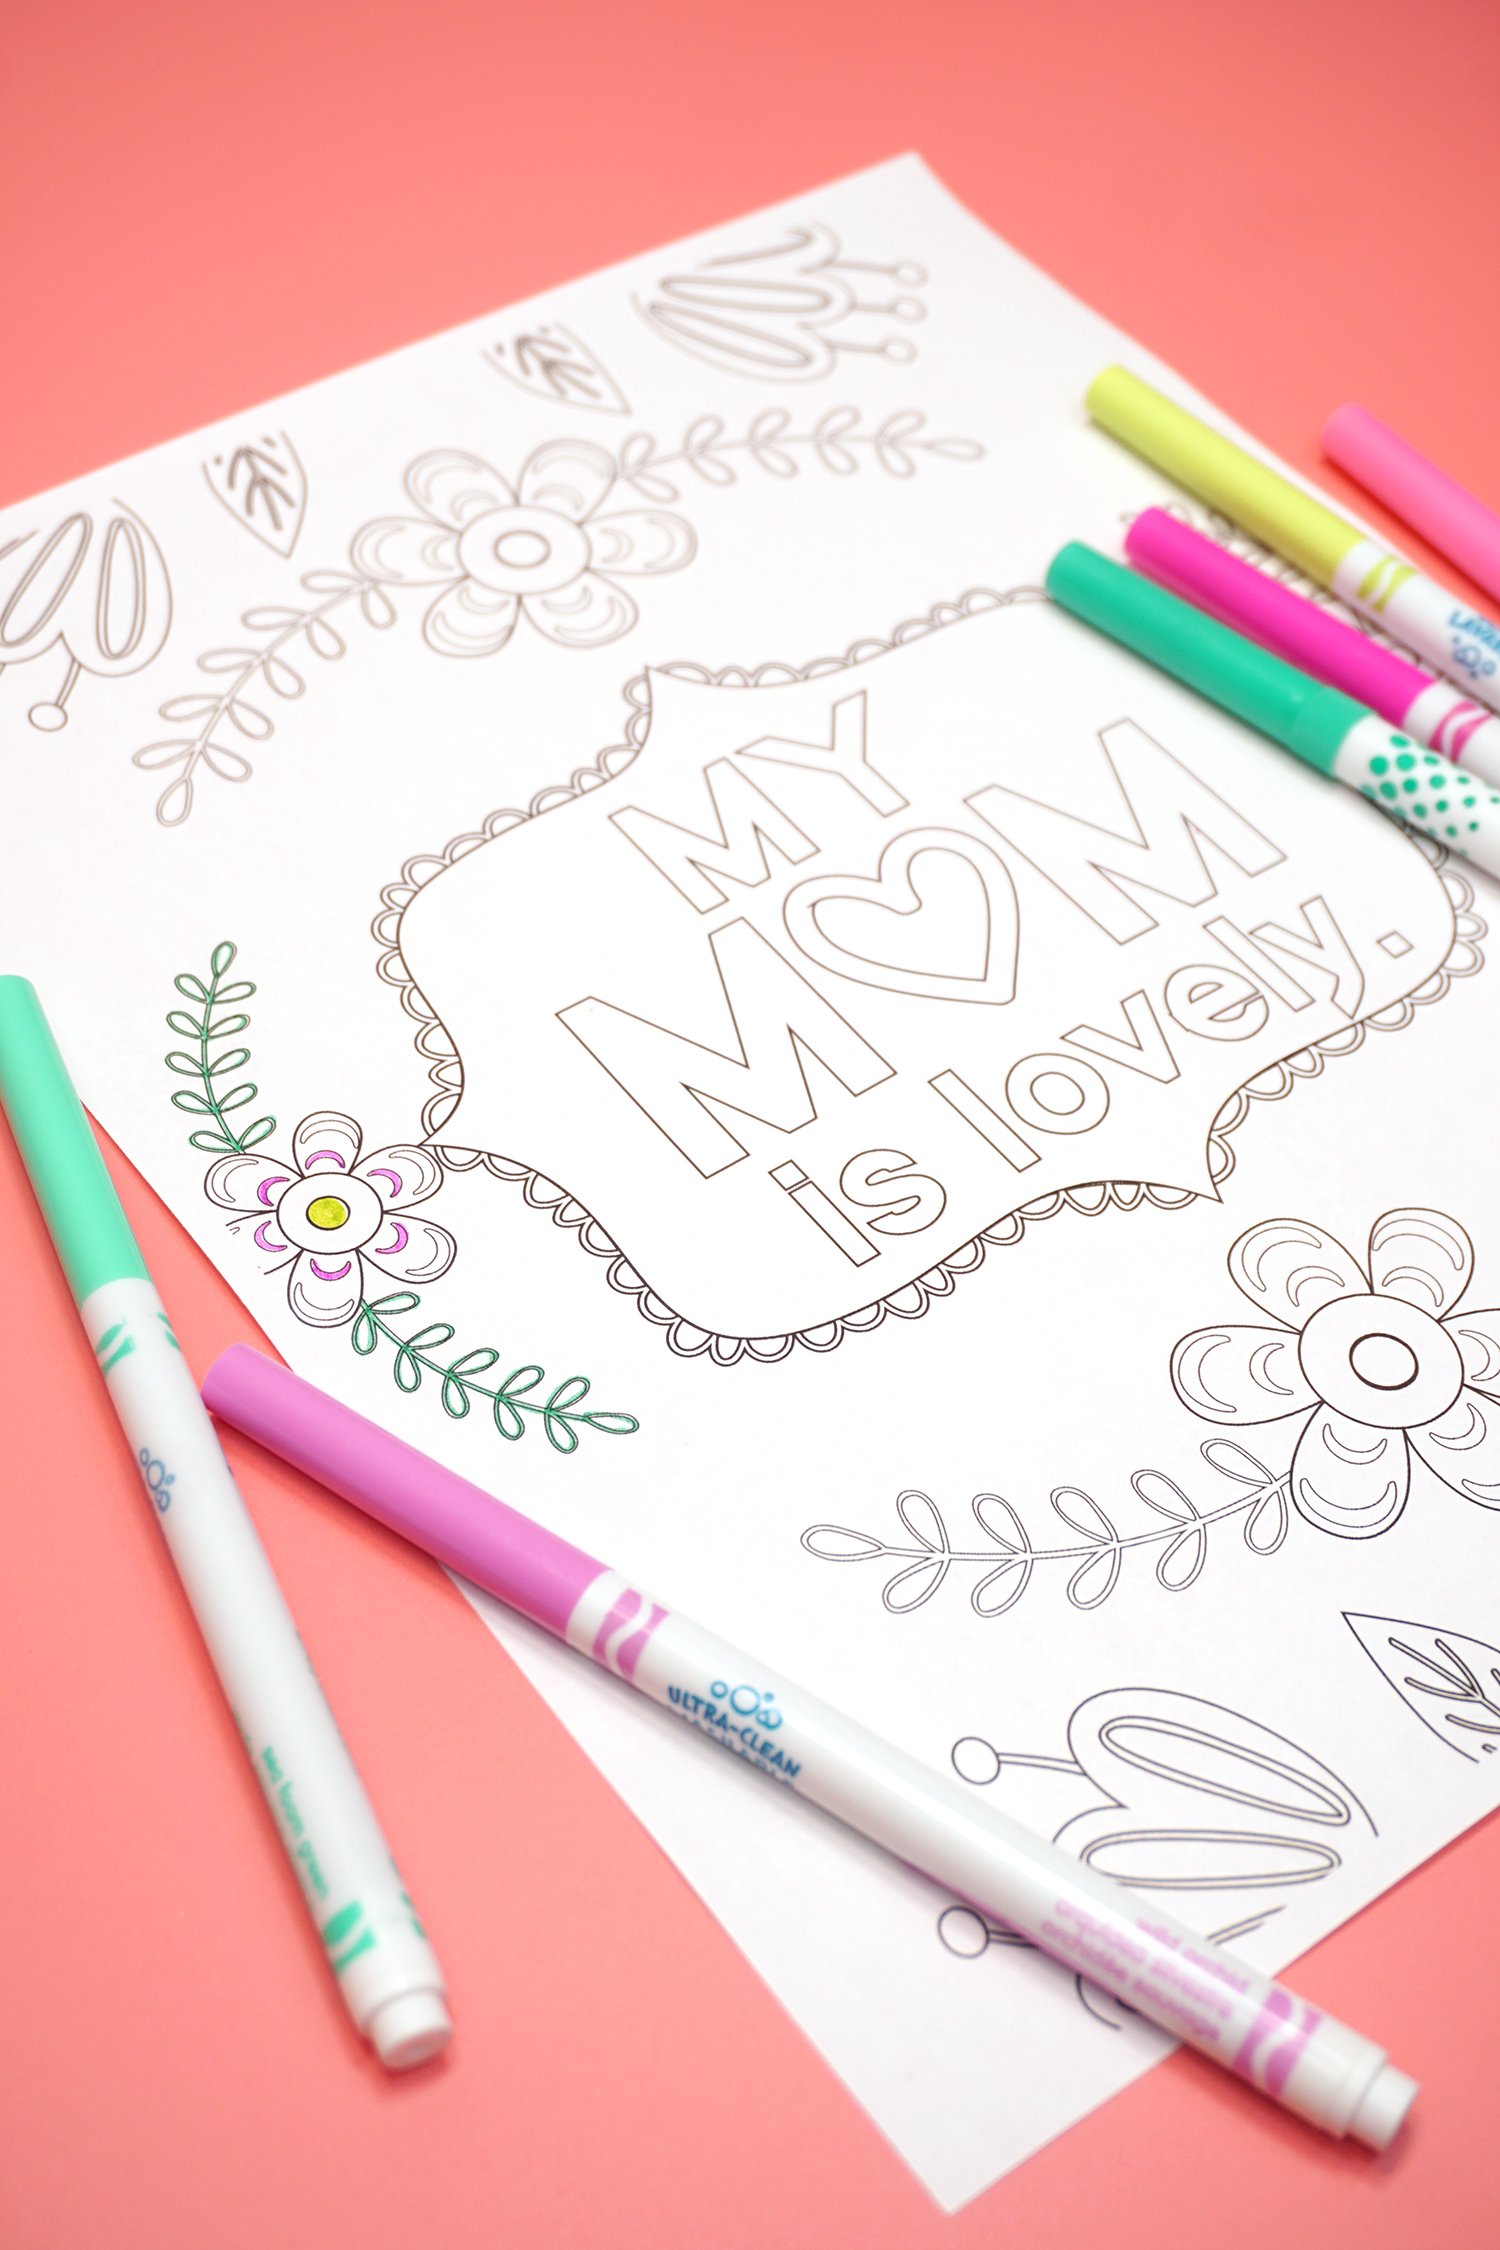 Mother's Day Coloring Page "My Mom is Lovely" with markers on a coral background